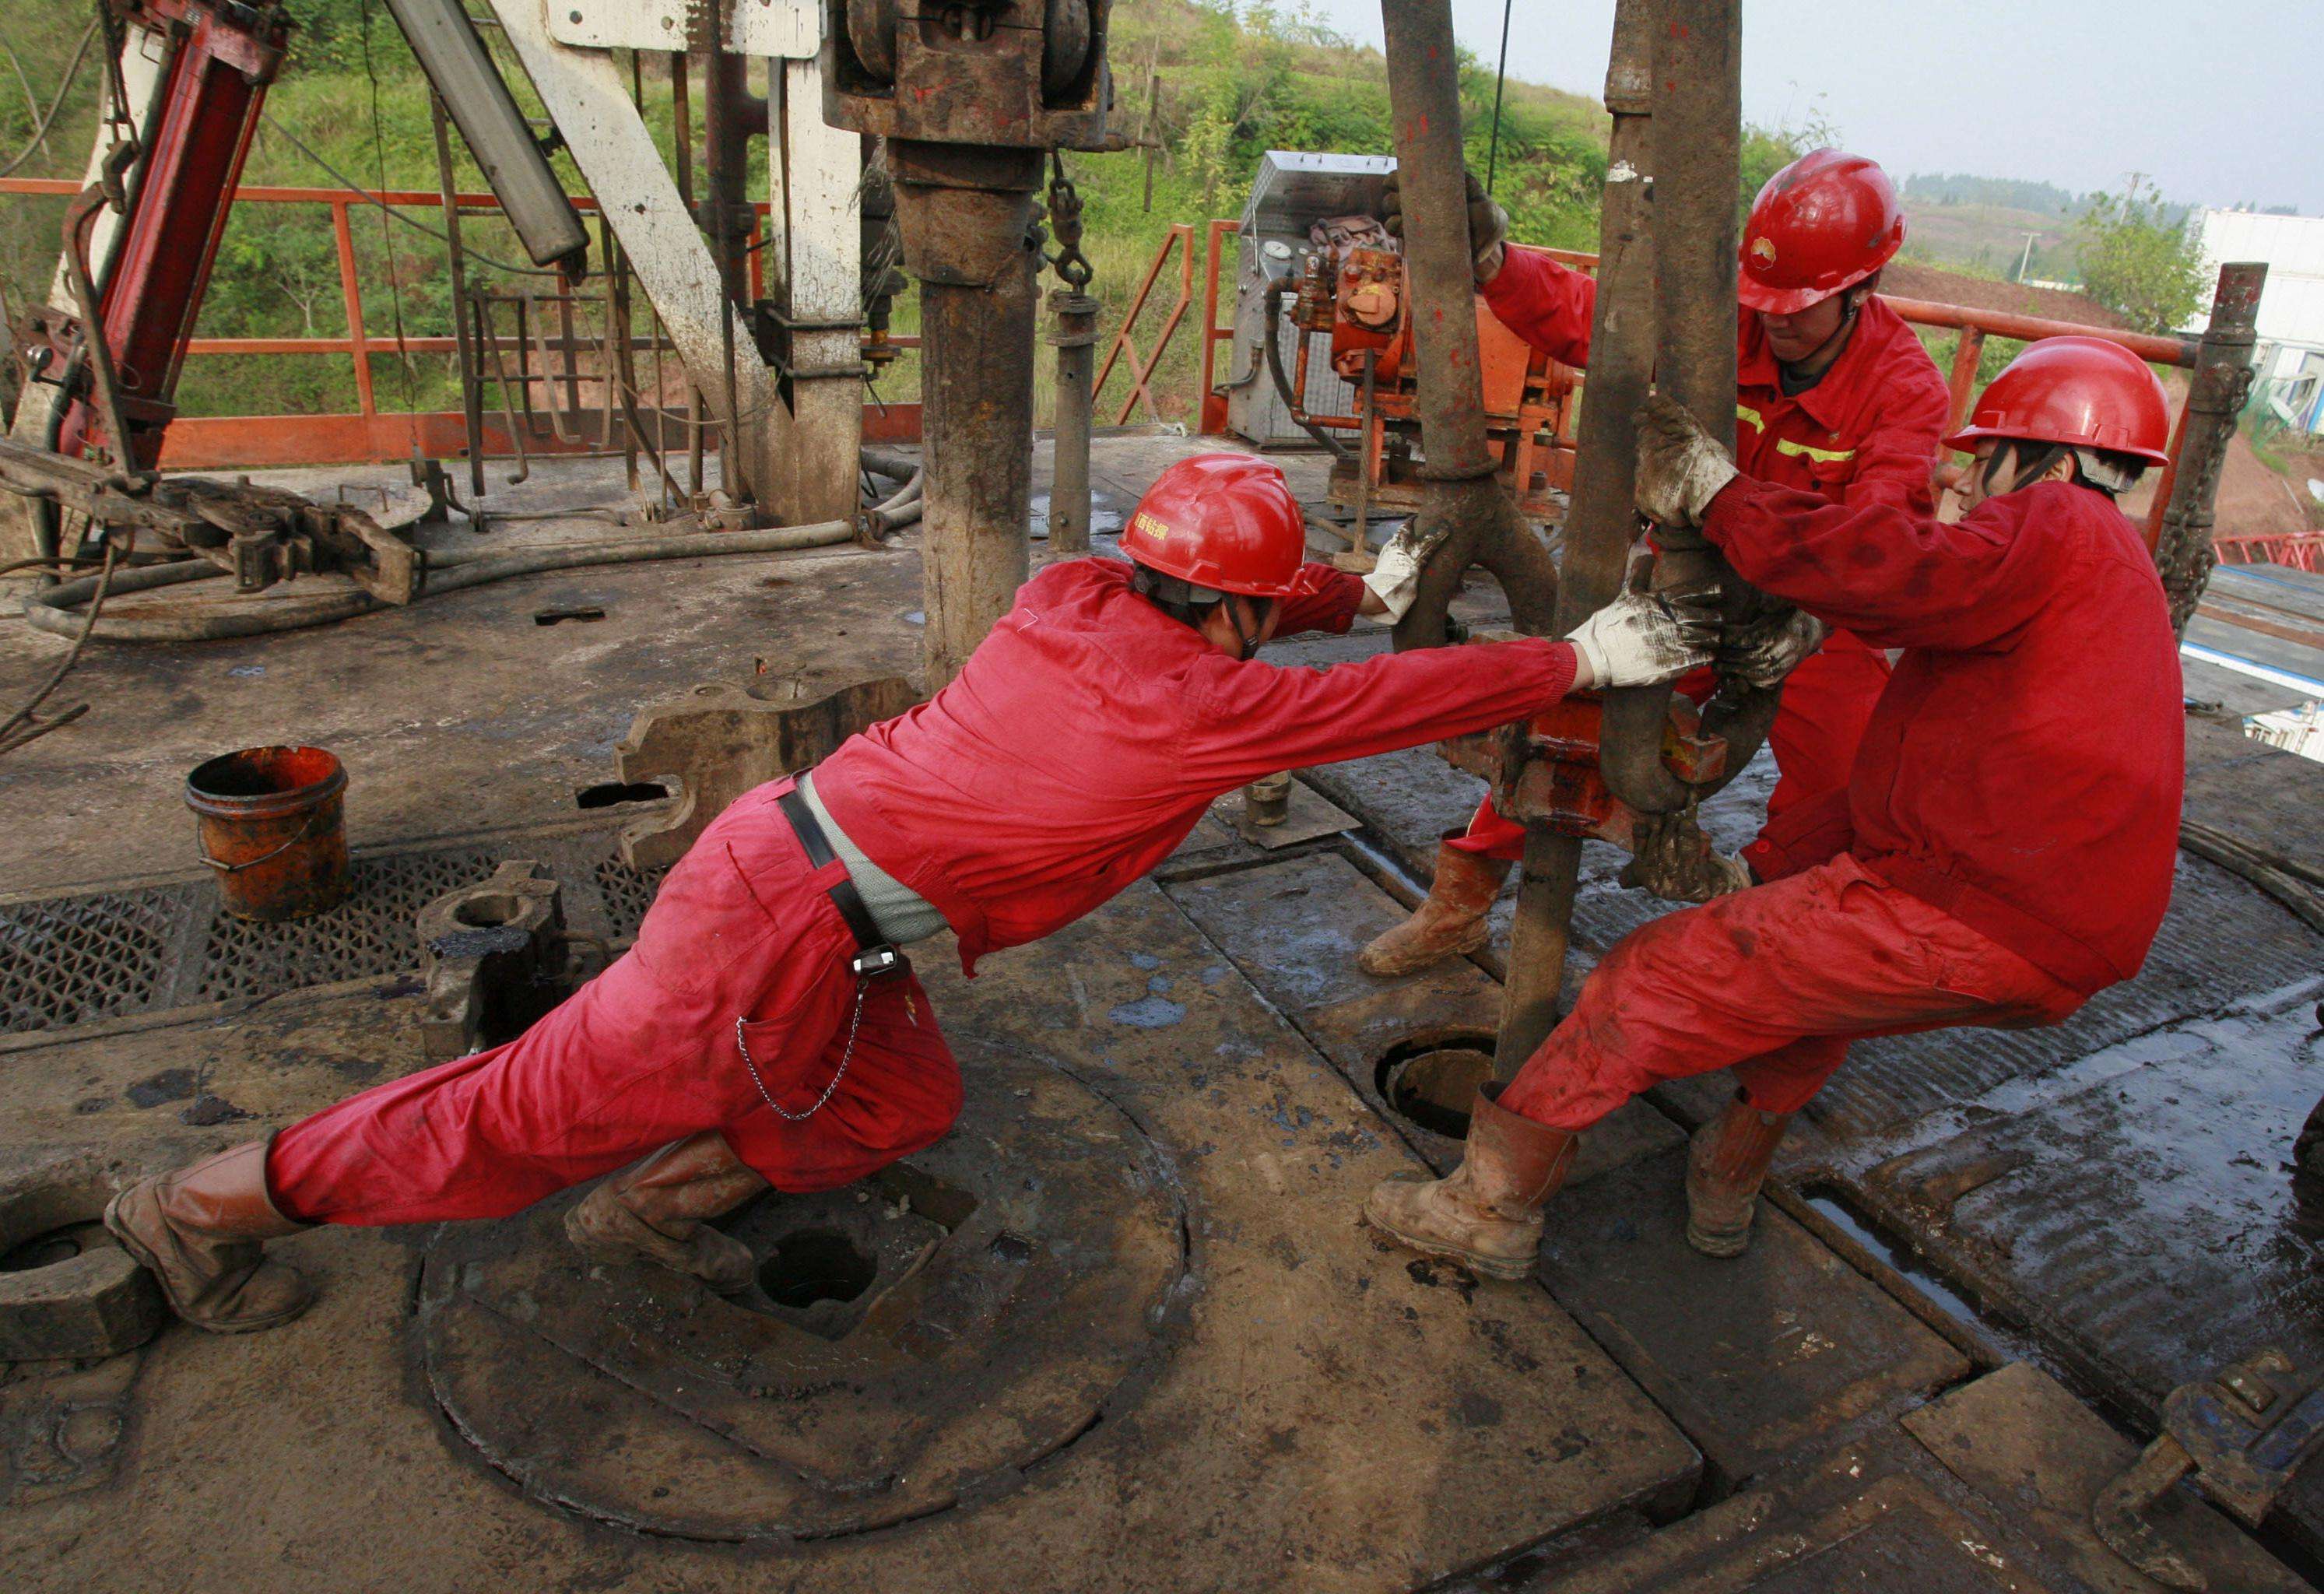 Labourers work at a well head in a PetroChina oil field in Tongnan, southwest China's Sichuan province. China National Petroleum Corp (CNPC) will be naming a new global trading arm chief to take the place of the veteran Wang Lihua, who is retiring shortly. Photo: Reuters